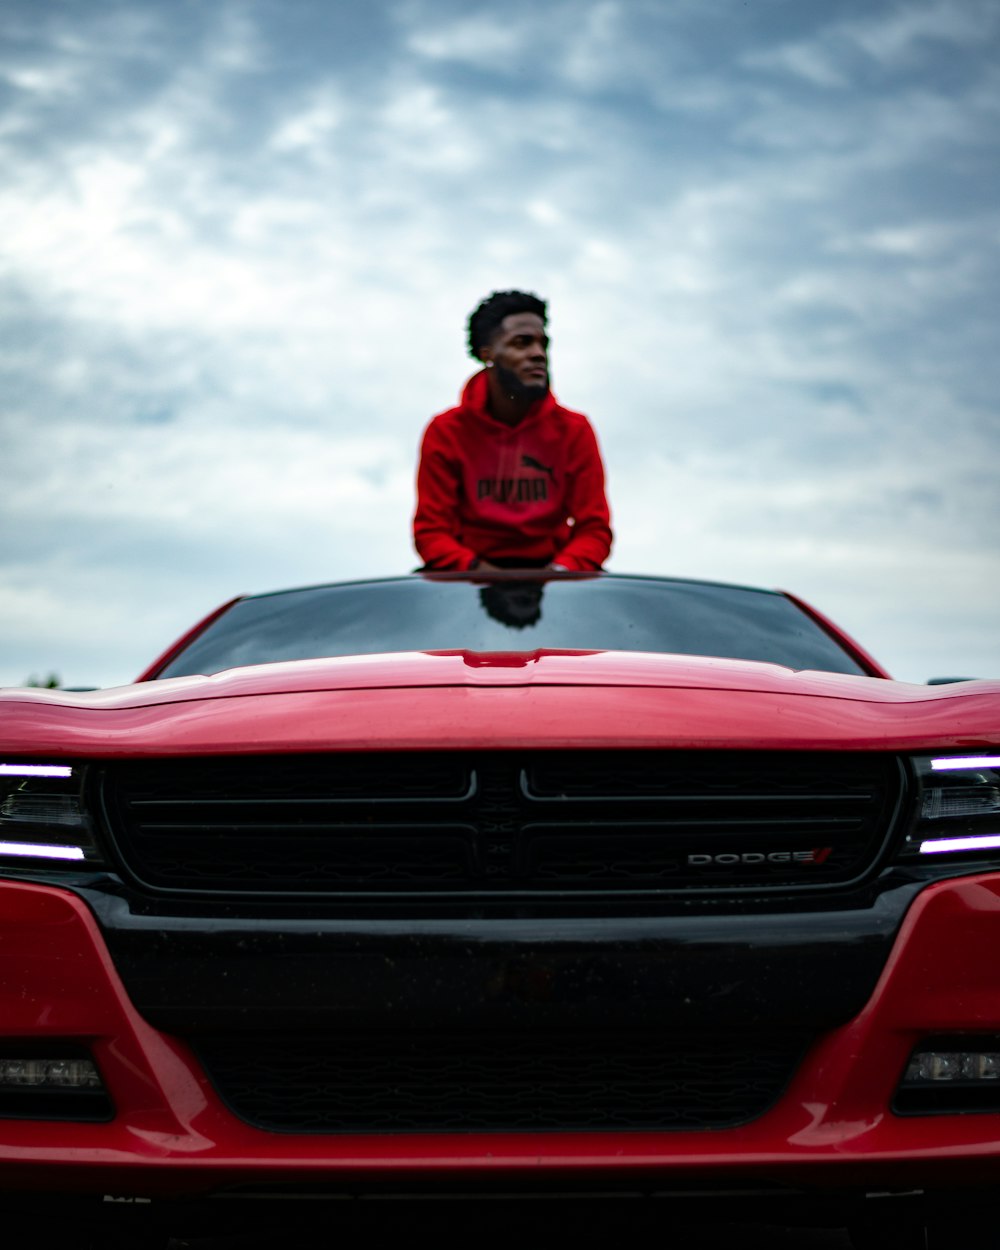 man in red jacket sitting on red chevrolet car